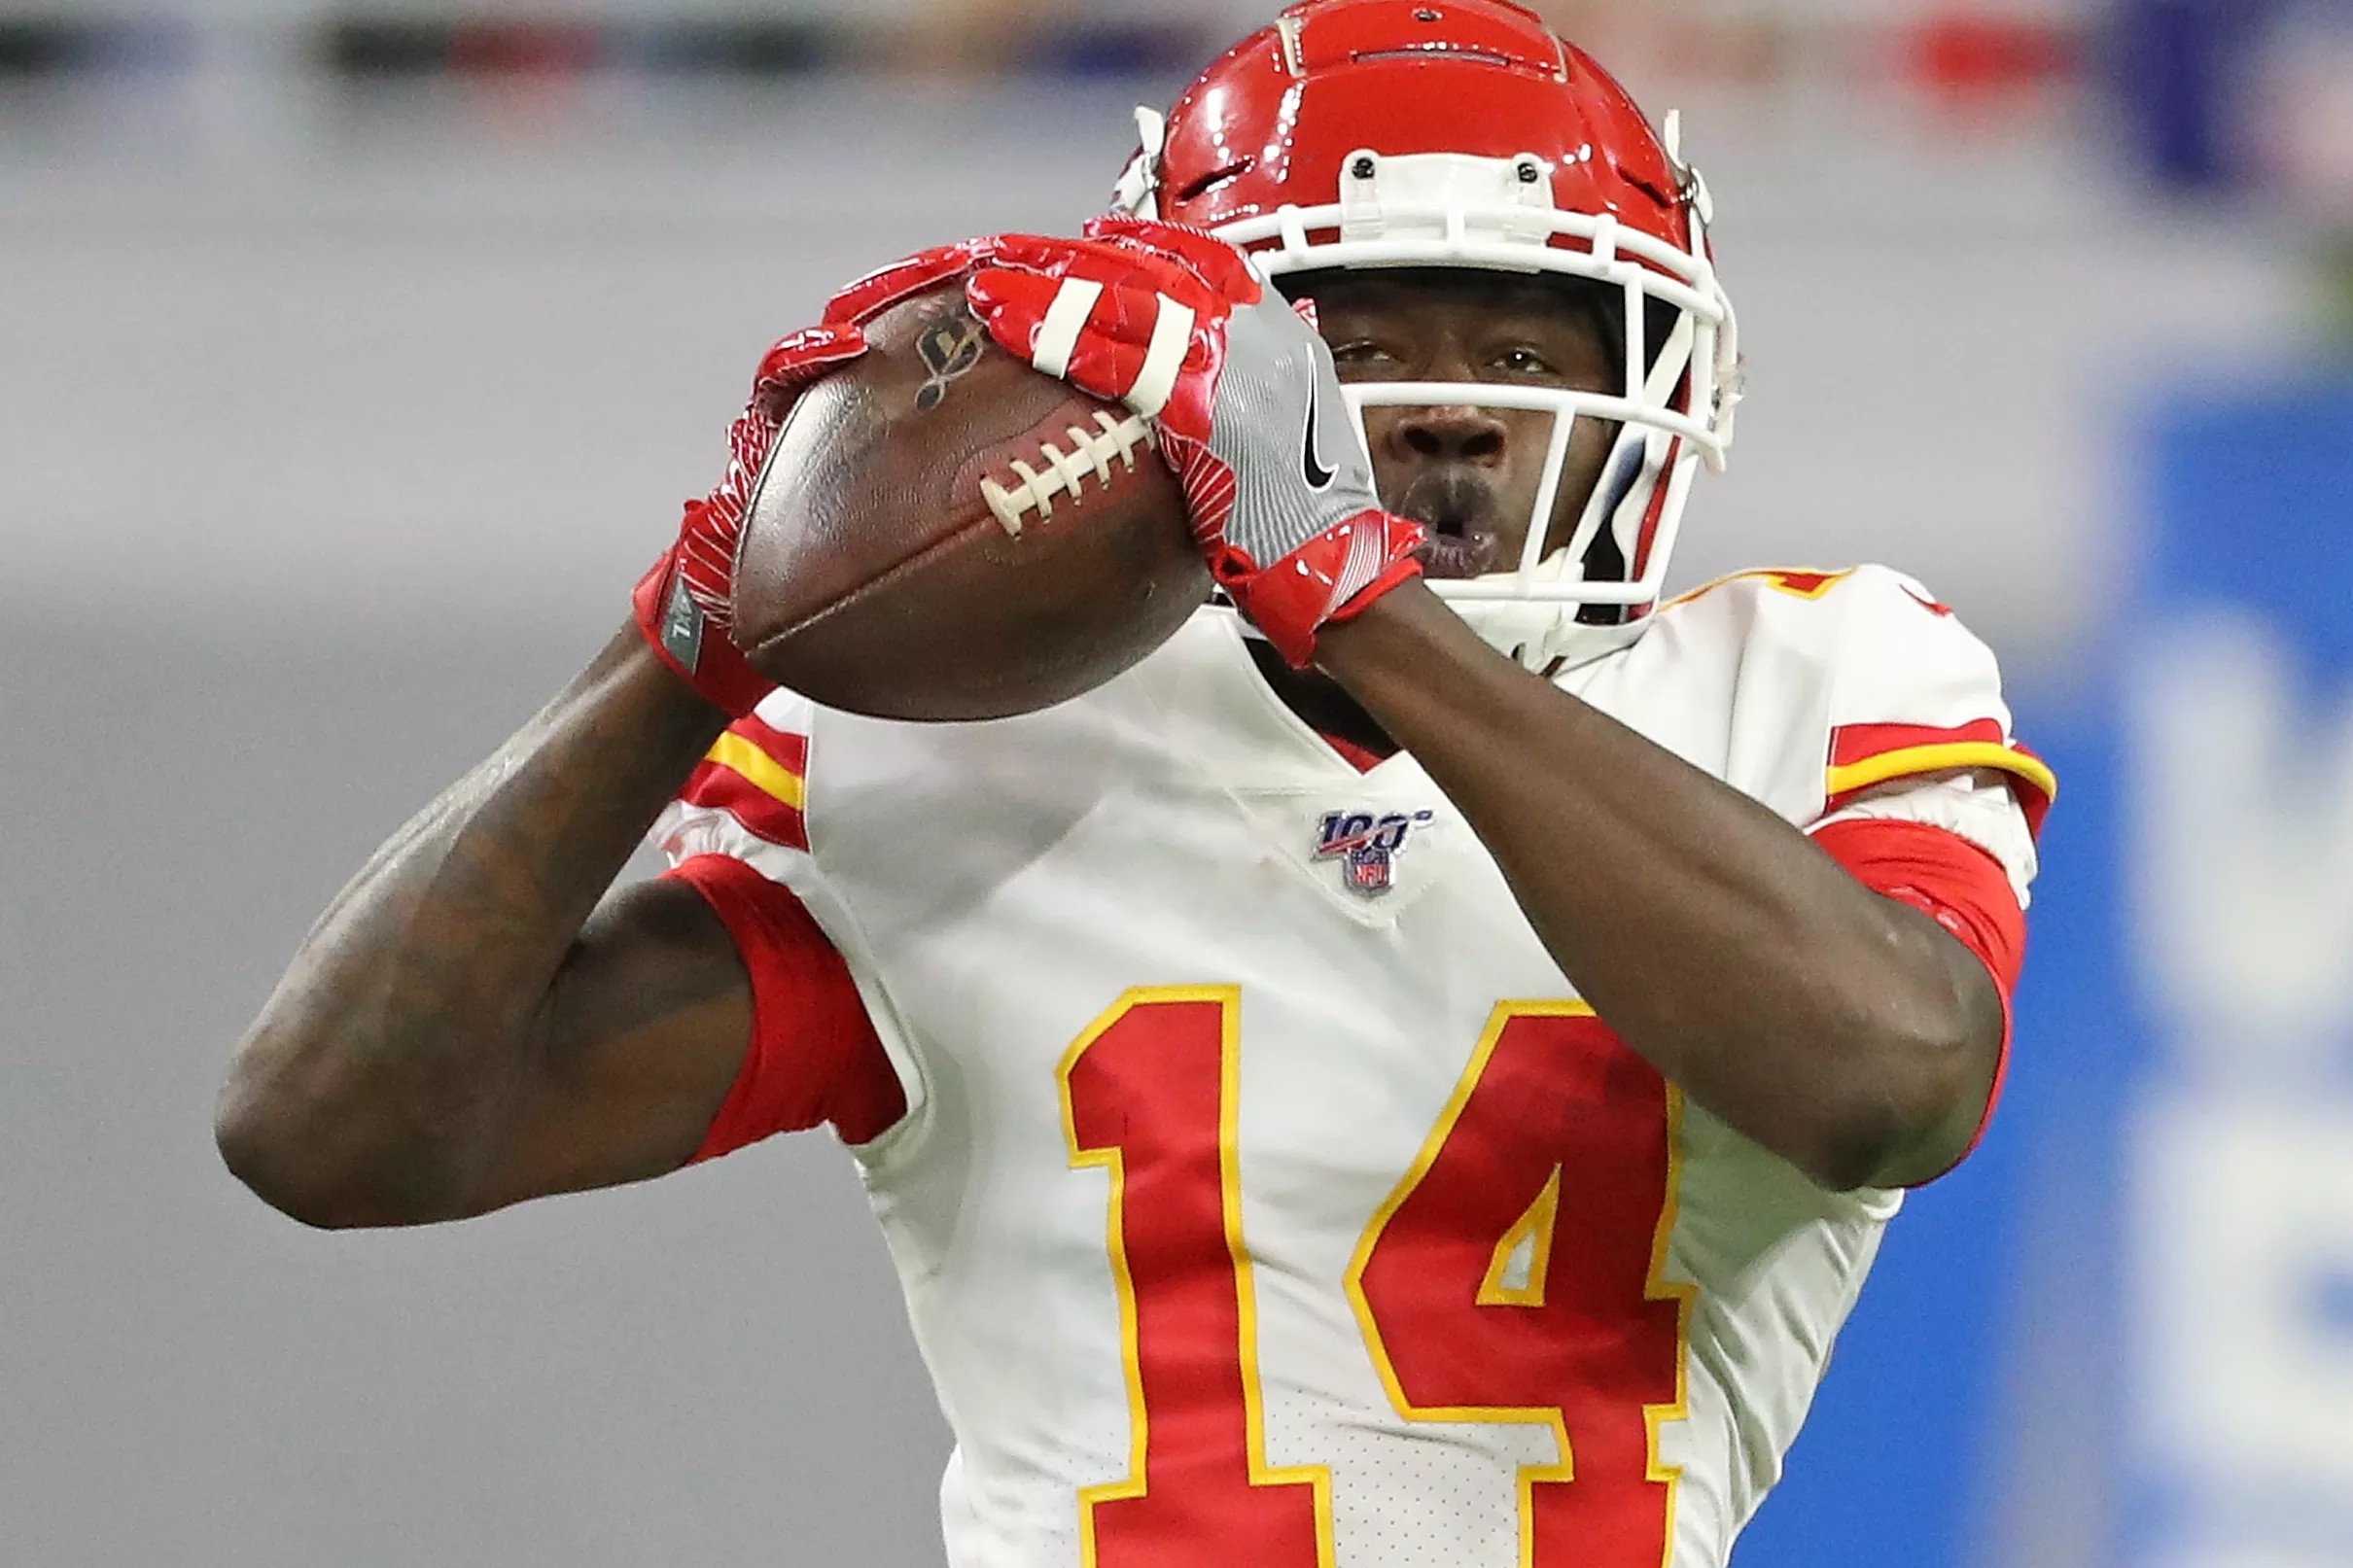 Chiefs Wednesday injury report: Kansas City has 12 players listed to start the week